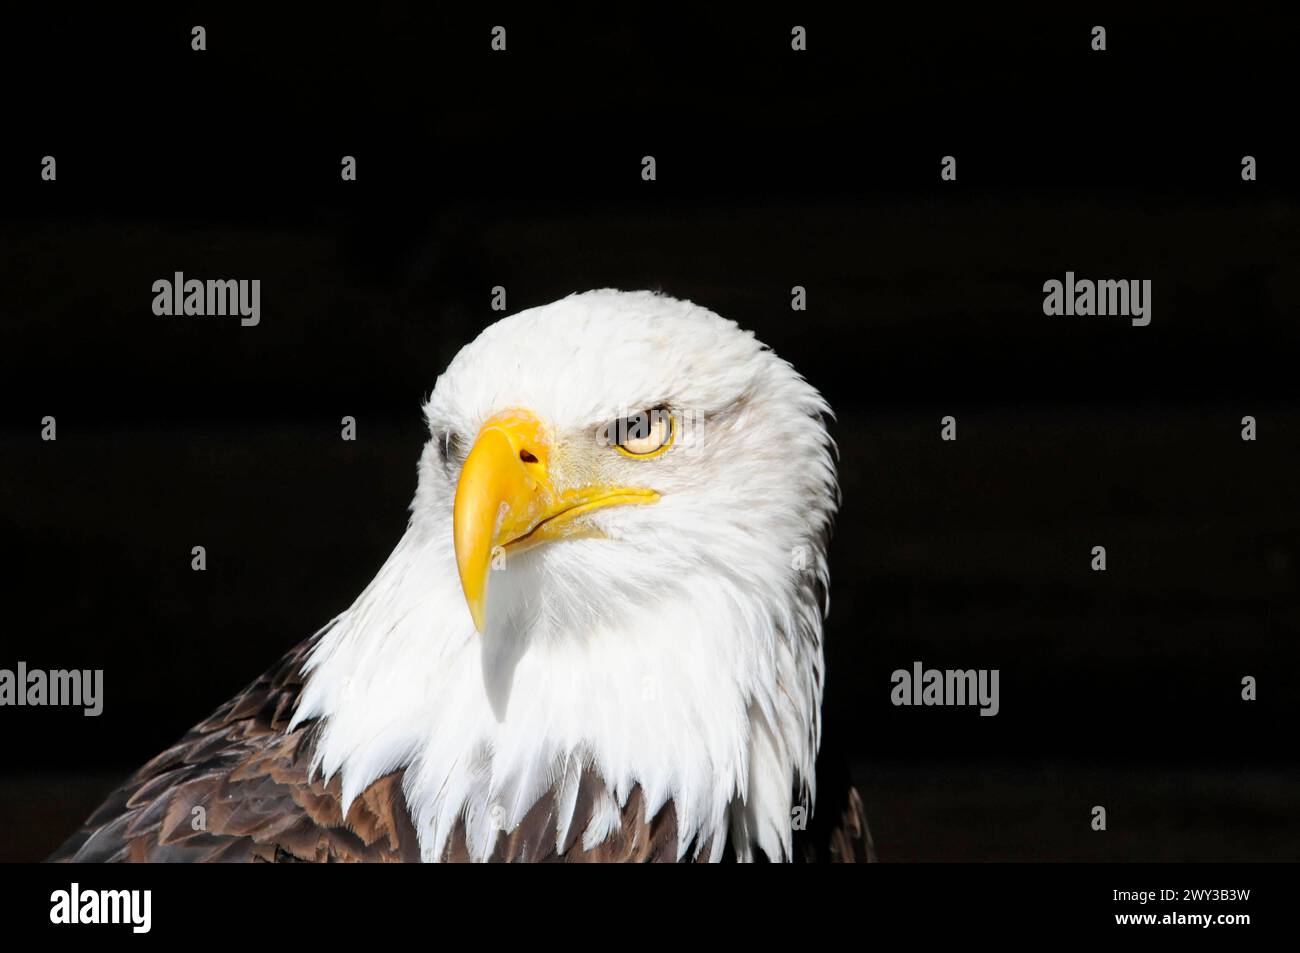 Bald eagle, Haliaeetus leucocephalus, frontal view of a bald eagle on a black background, effective view, captive, Fuerstenfeld Monastery Stock Photo